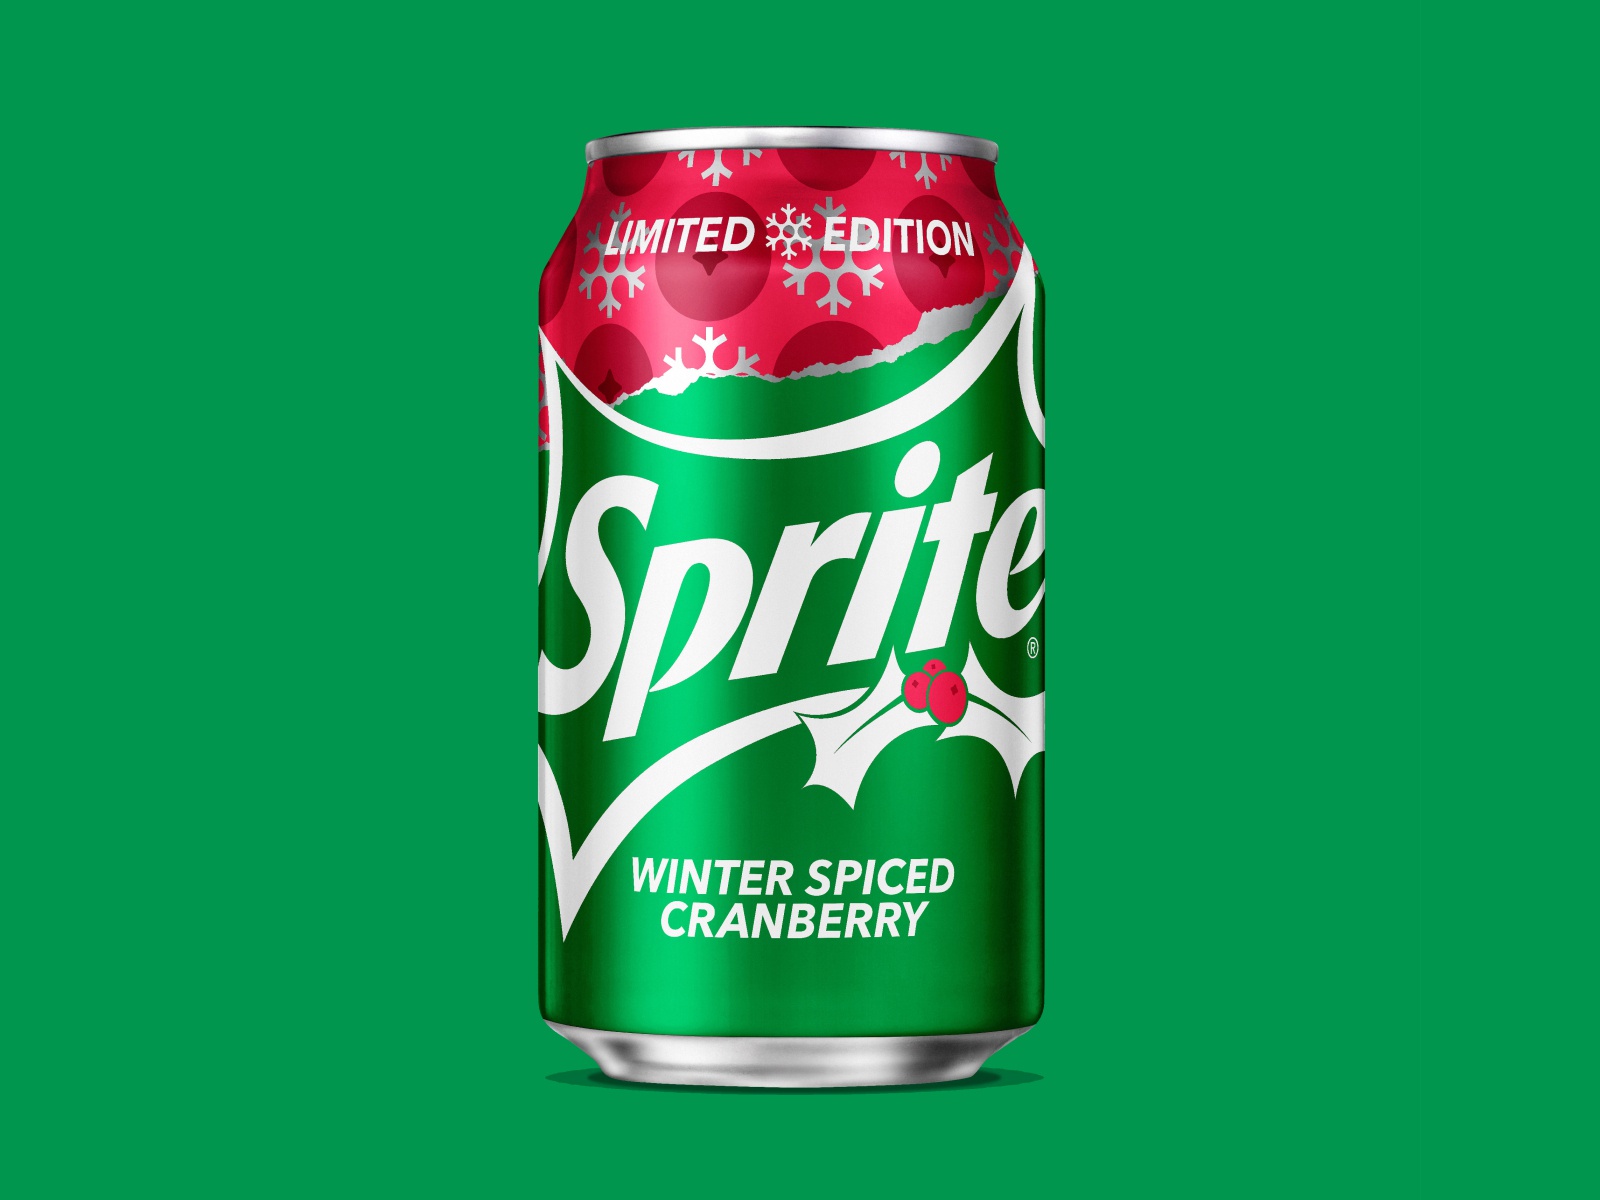 Sprite Winter Spiced Cranberry By Michael Padgett On Dribbble